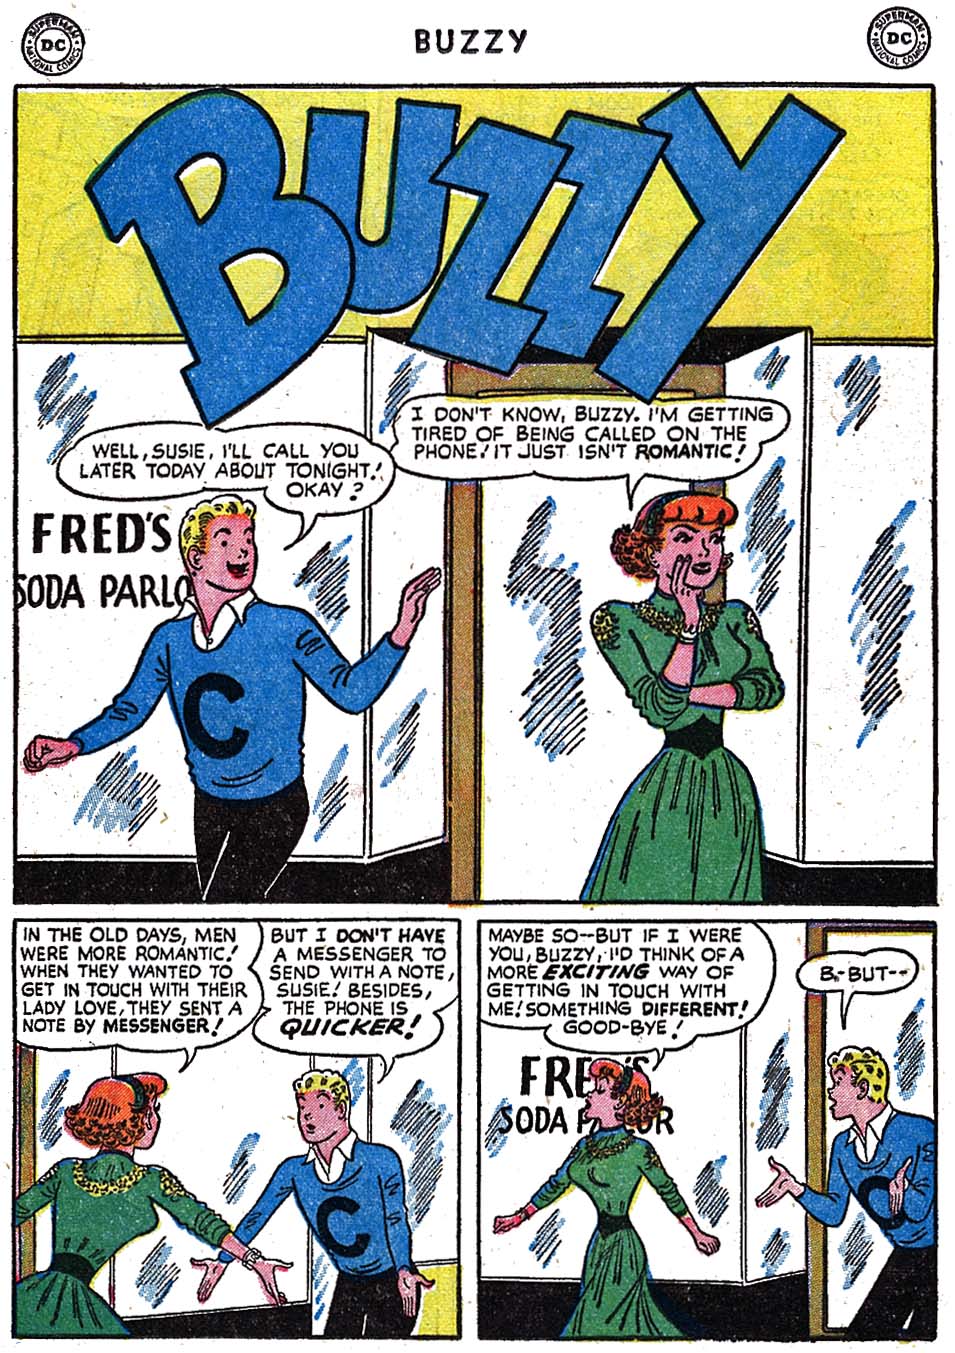 Read online Buzzy comic -  Issue #55 - 26